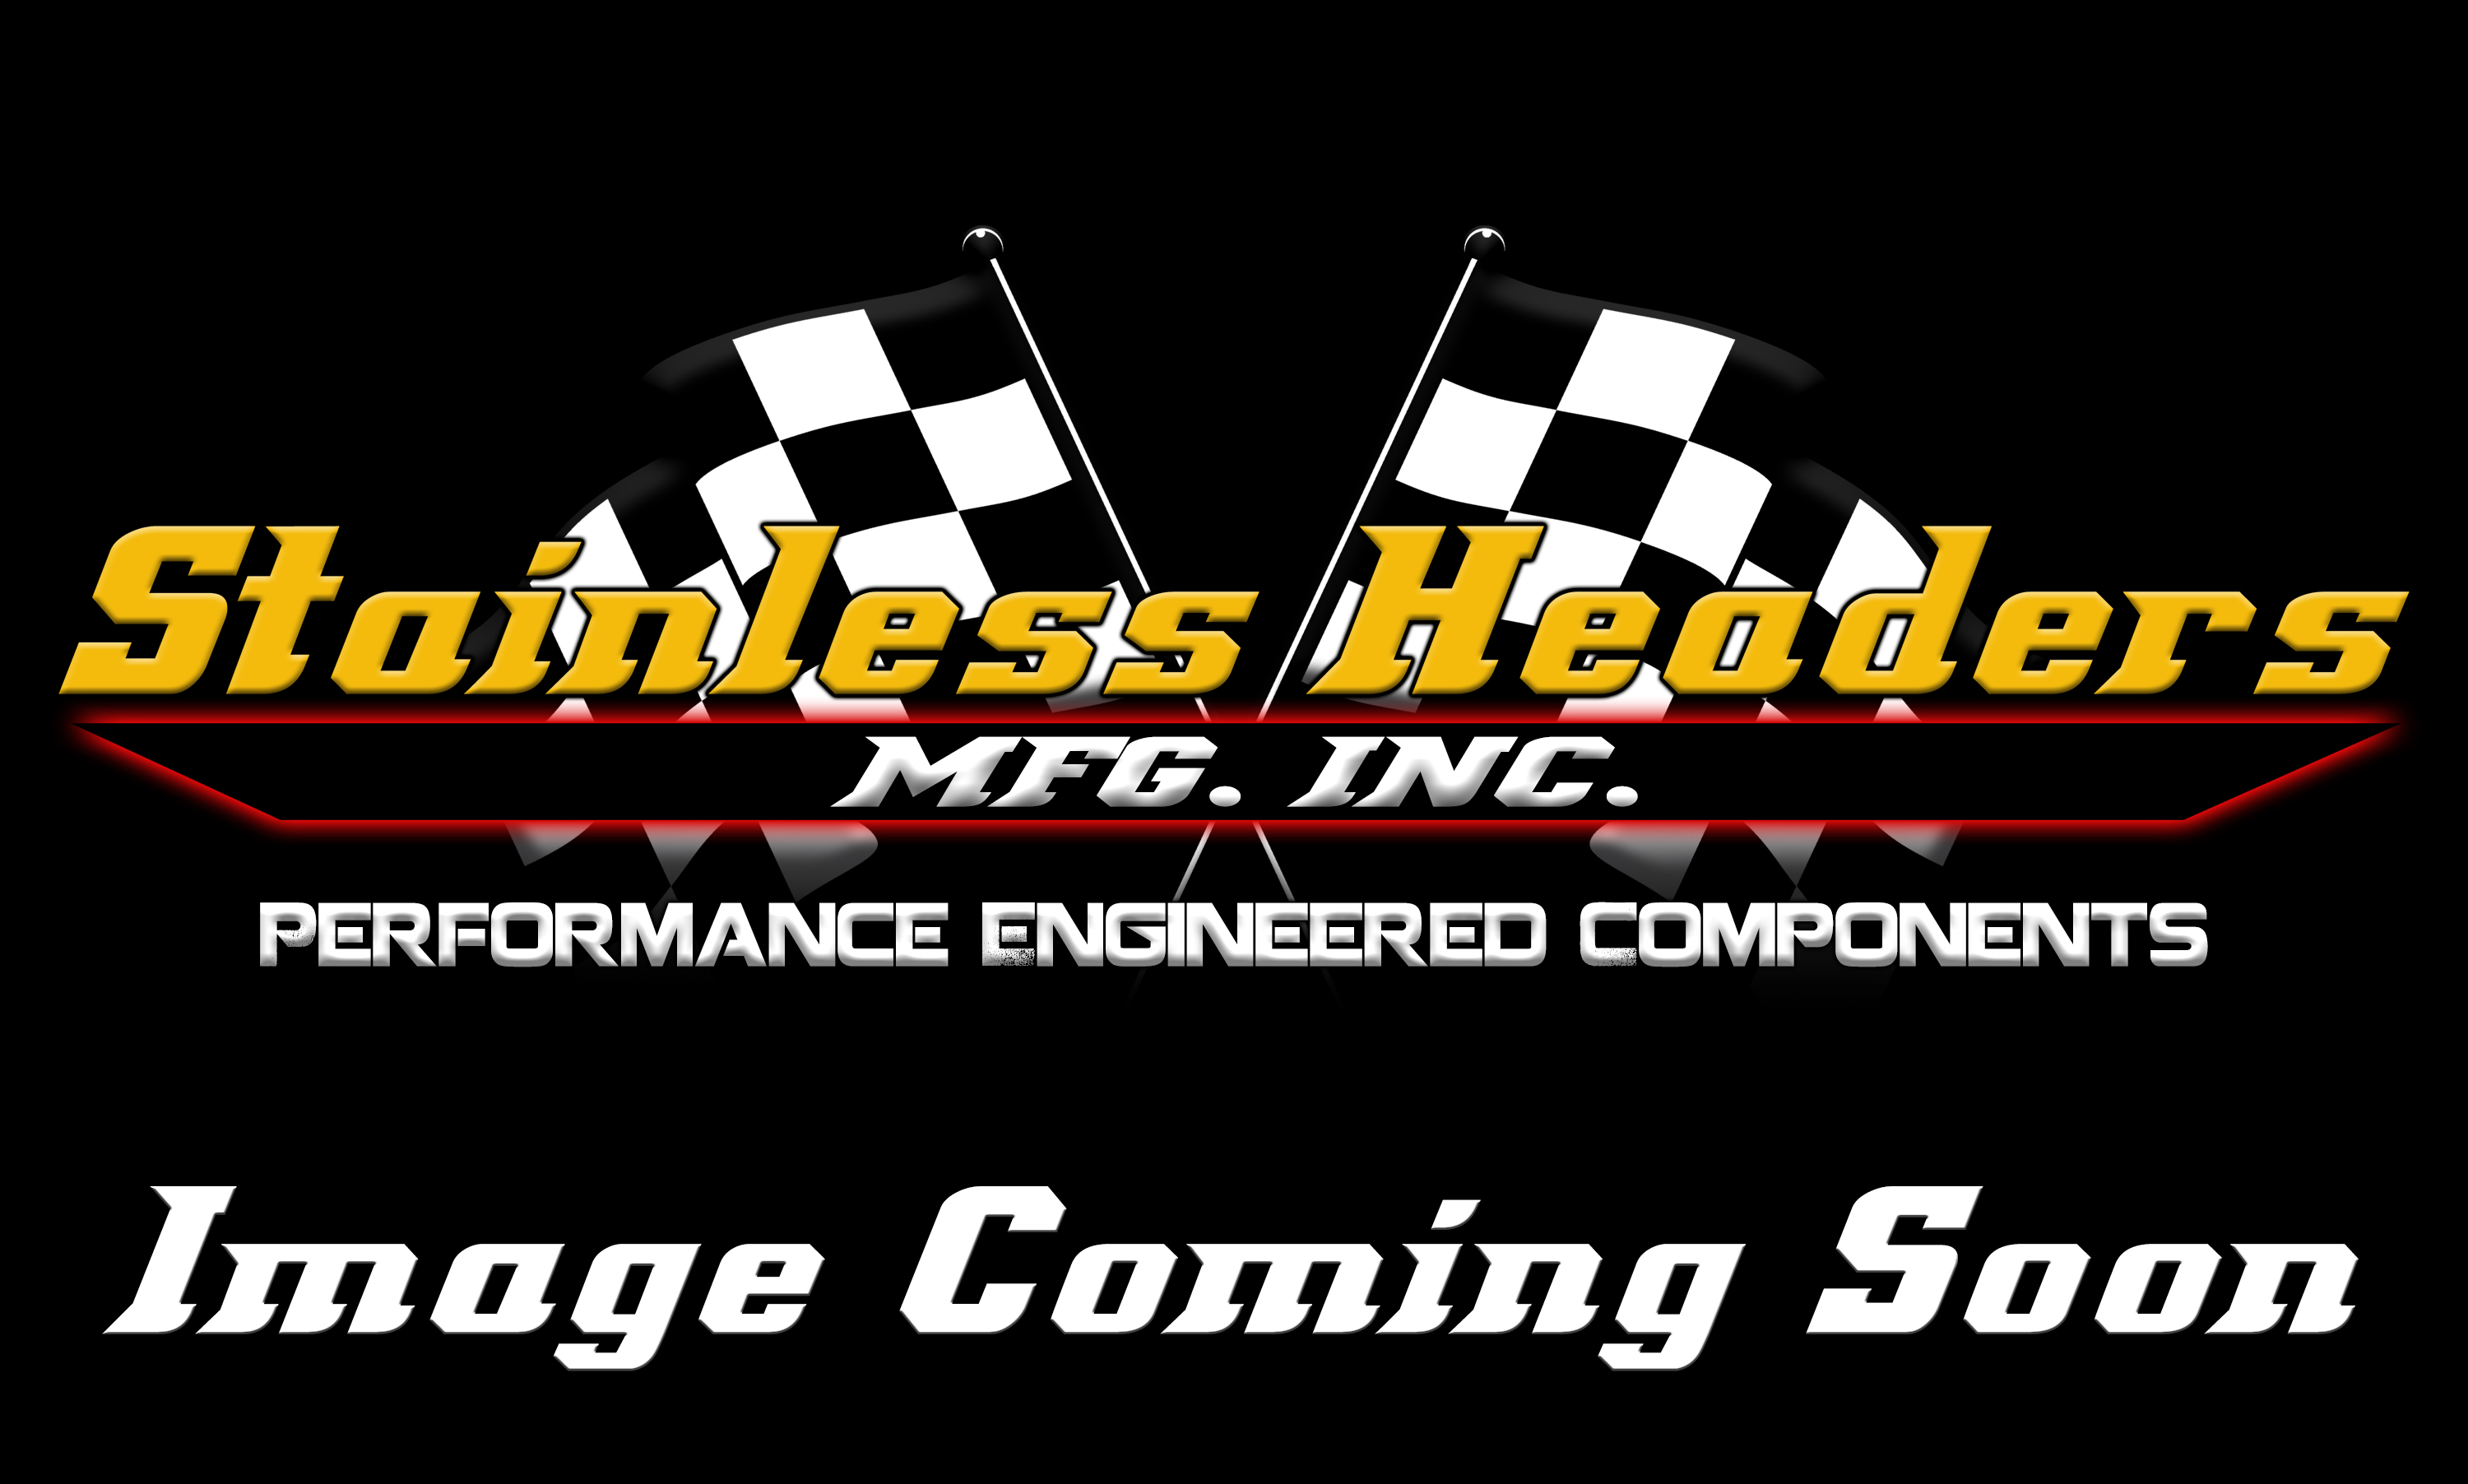 CompTurbo Technologies - CTR4202R-7485 Mid Frame Oil Lubricated 2.0 Turbocharger (1300 HP) - Image 1